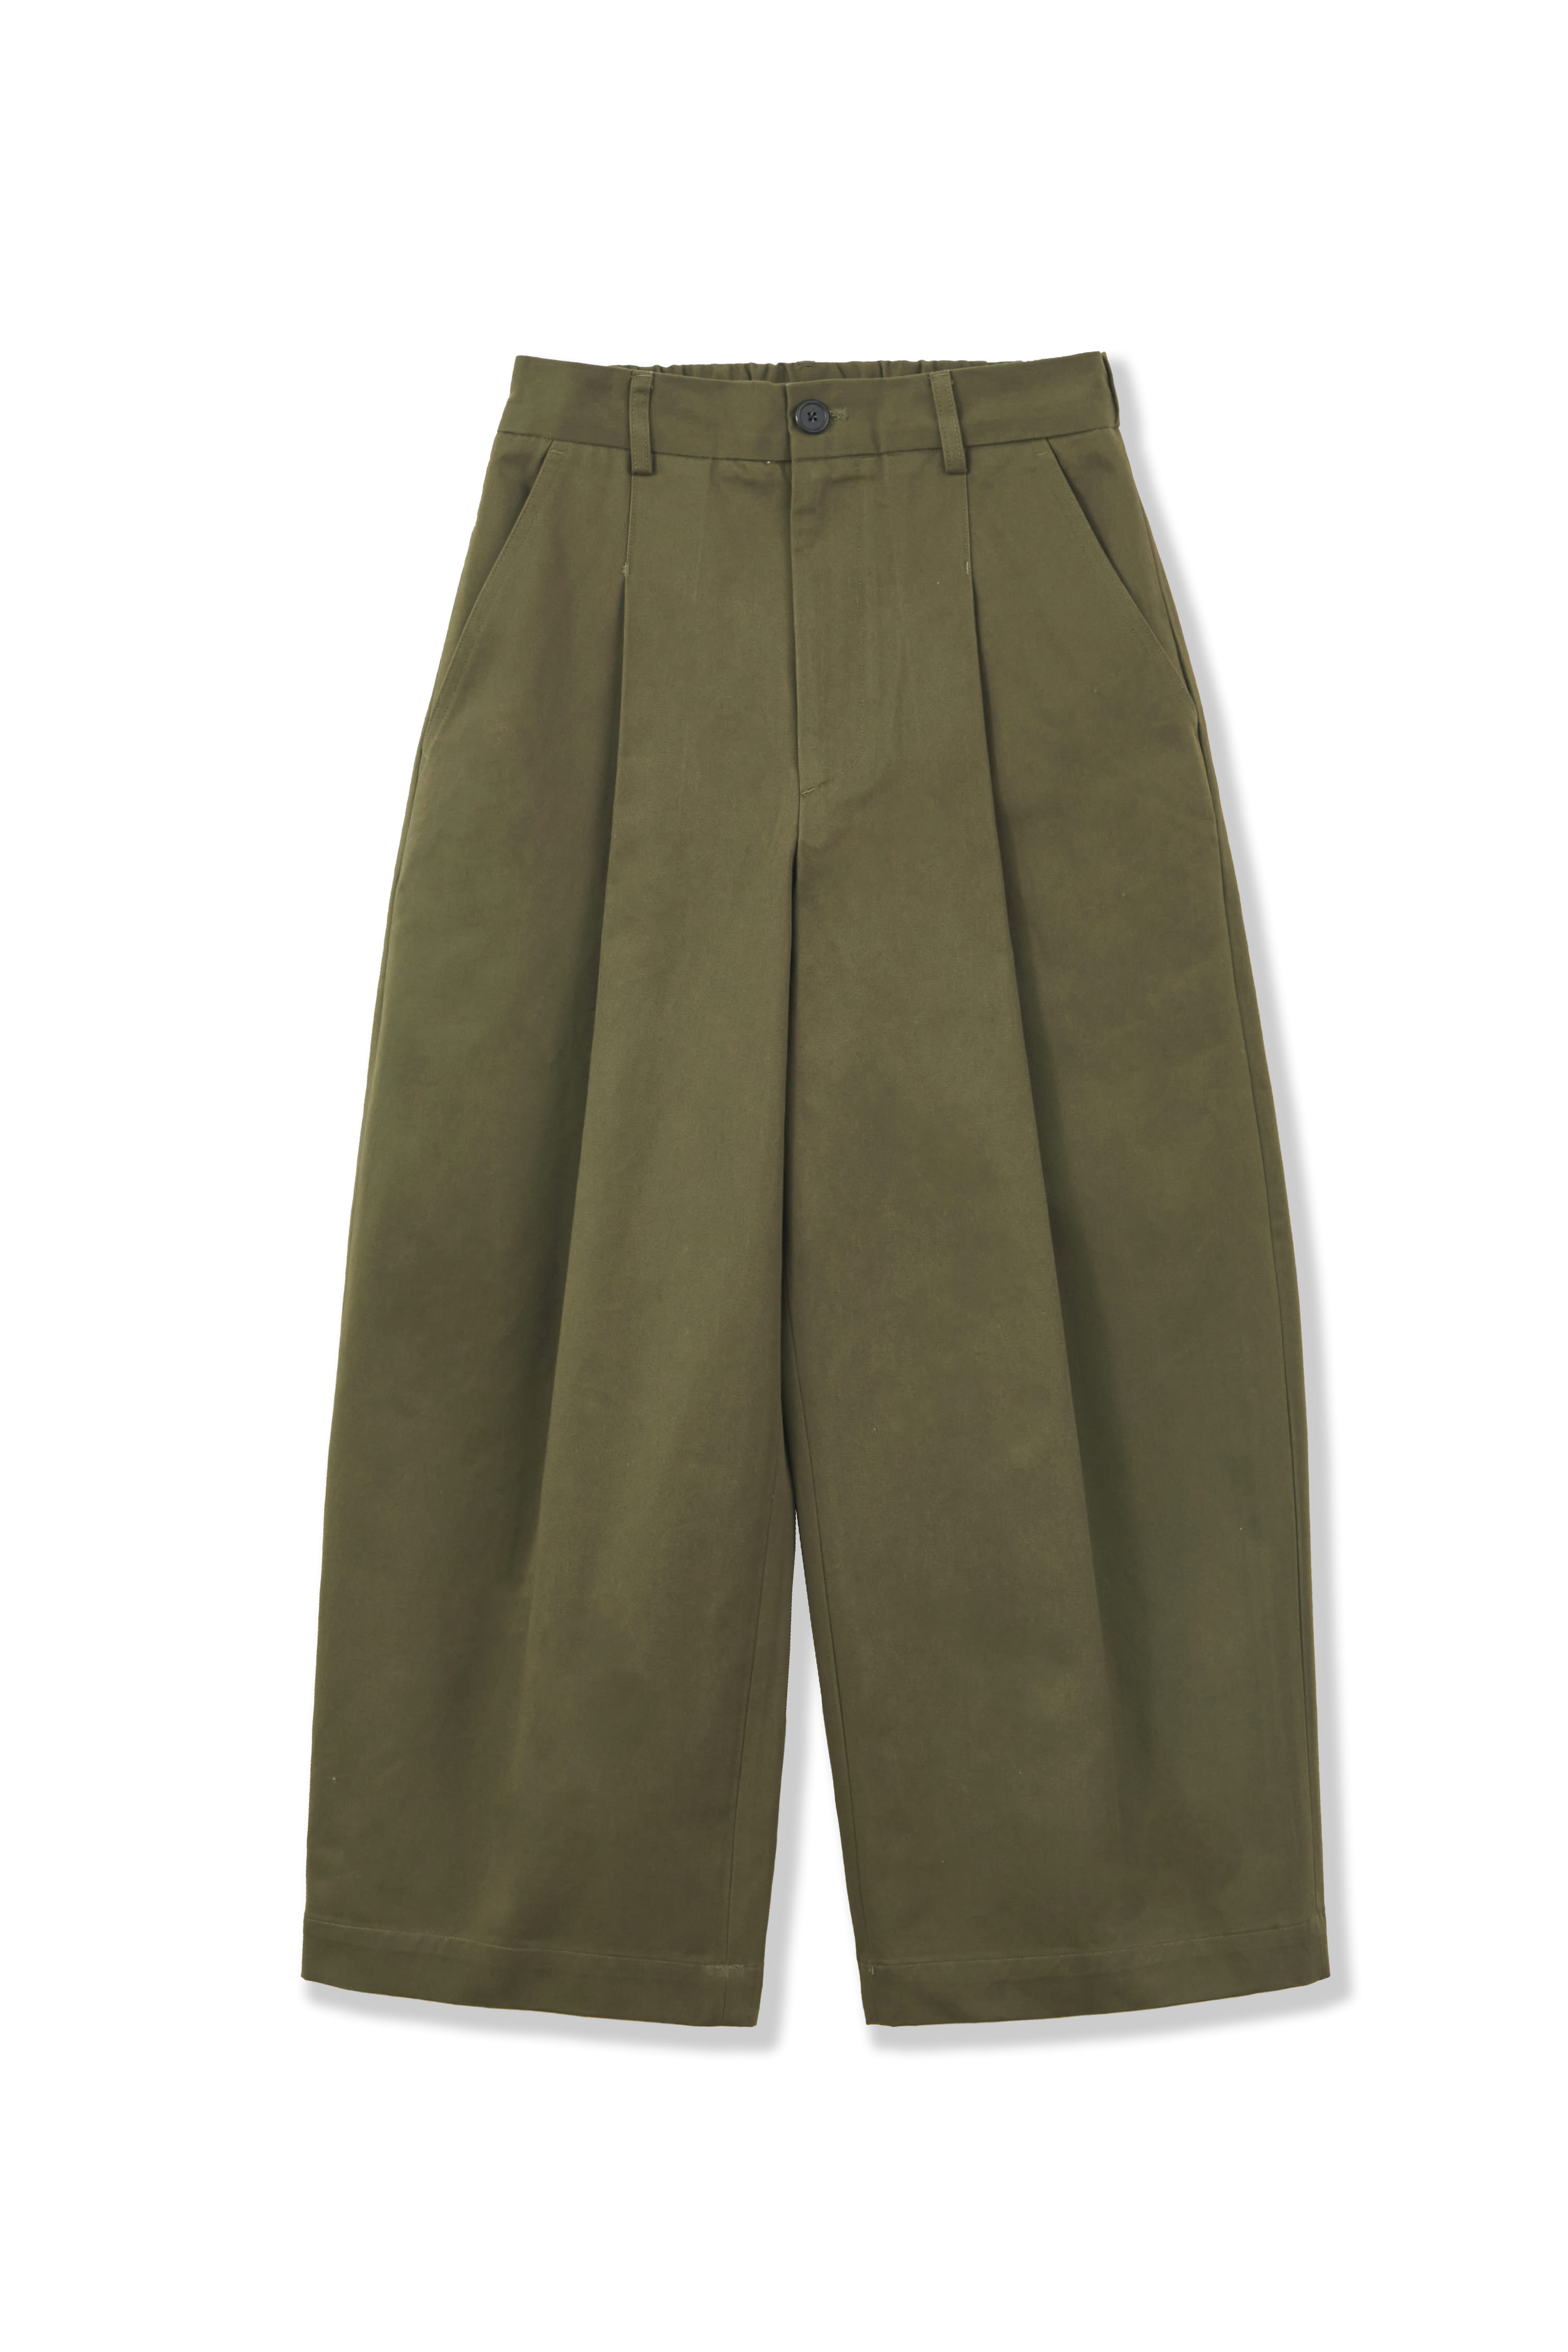 PERENN퍼렌 22'SS curved wide trousers_olive drab